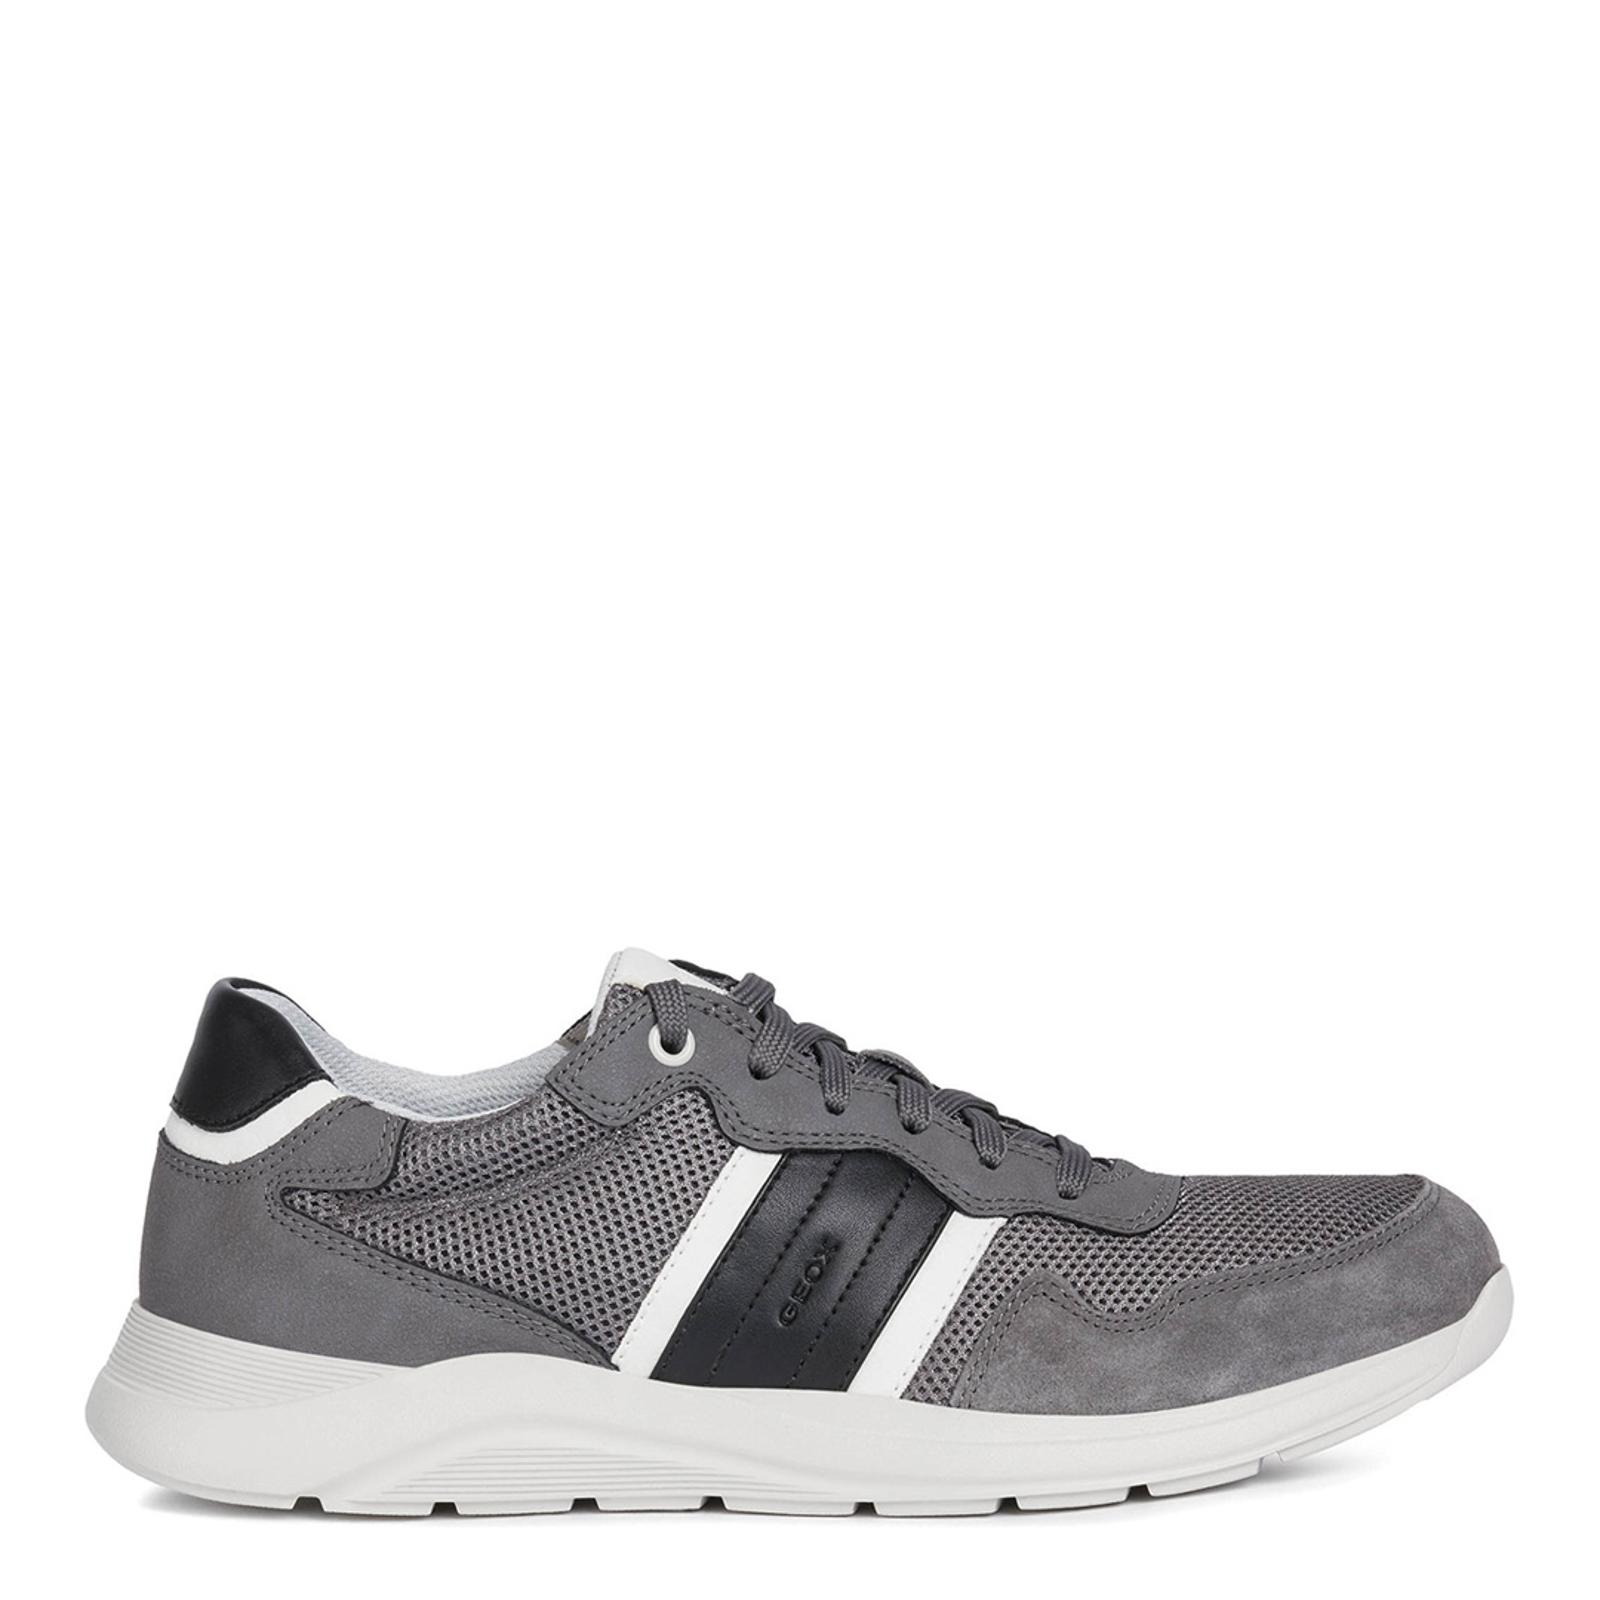 Grey Damiano Sneakers - BrandAlley